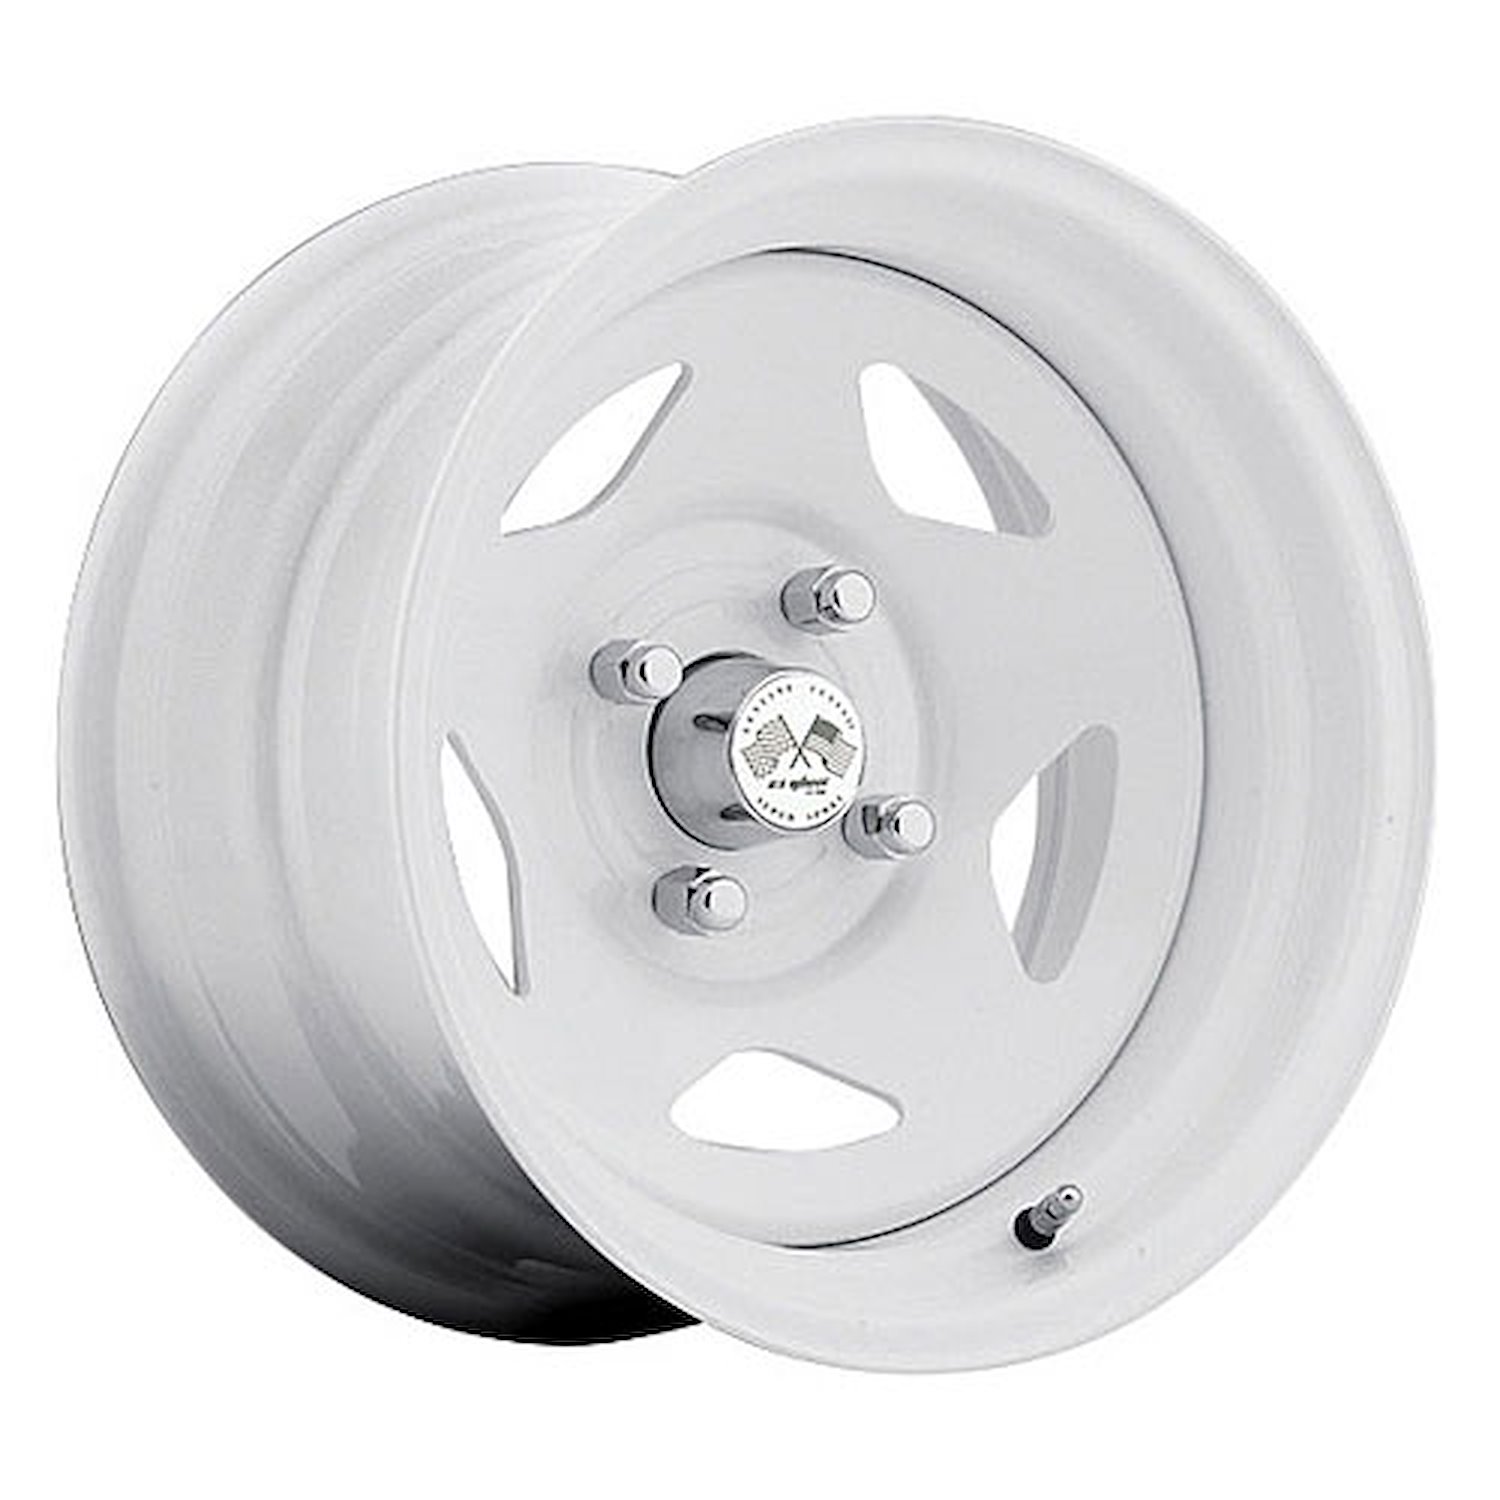 PAINTED STAR FWD DRIFTER WHITE 15 x 8 4 x 45 Bolt Circle 5 Back Spacing +16 offset 266 Center Bore 1400 lbs Load Rating